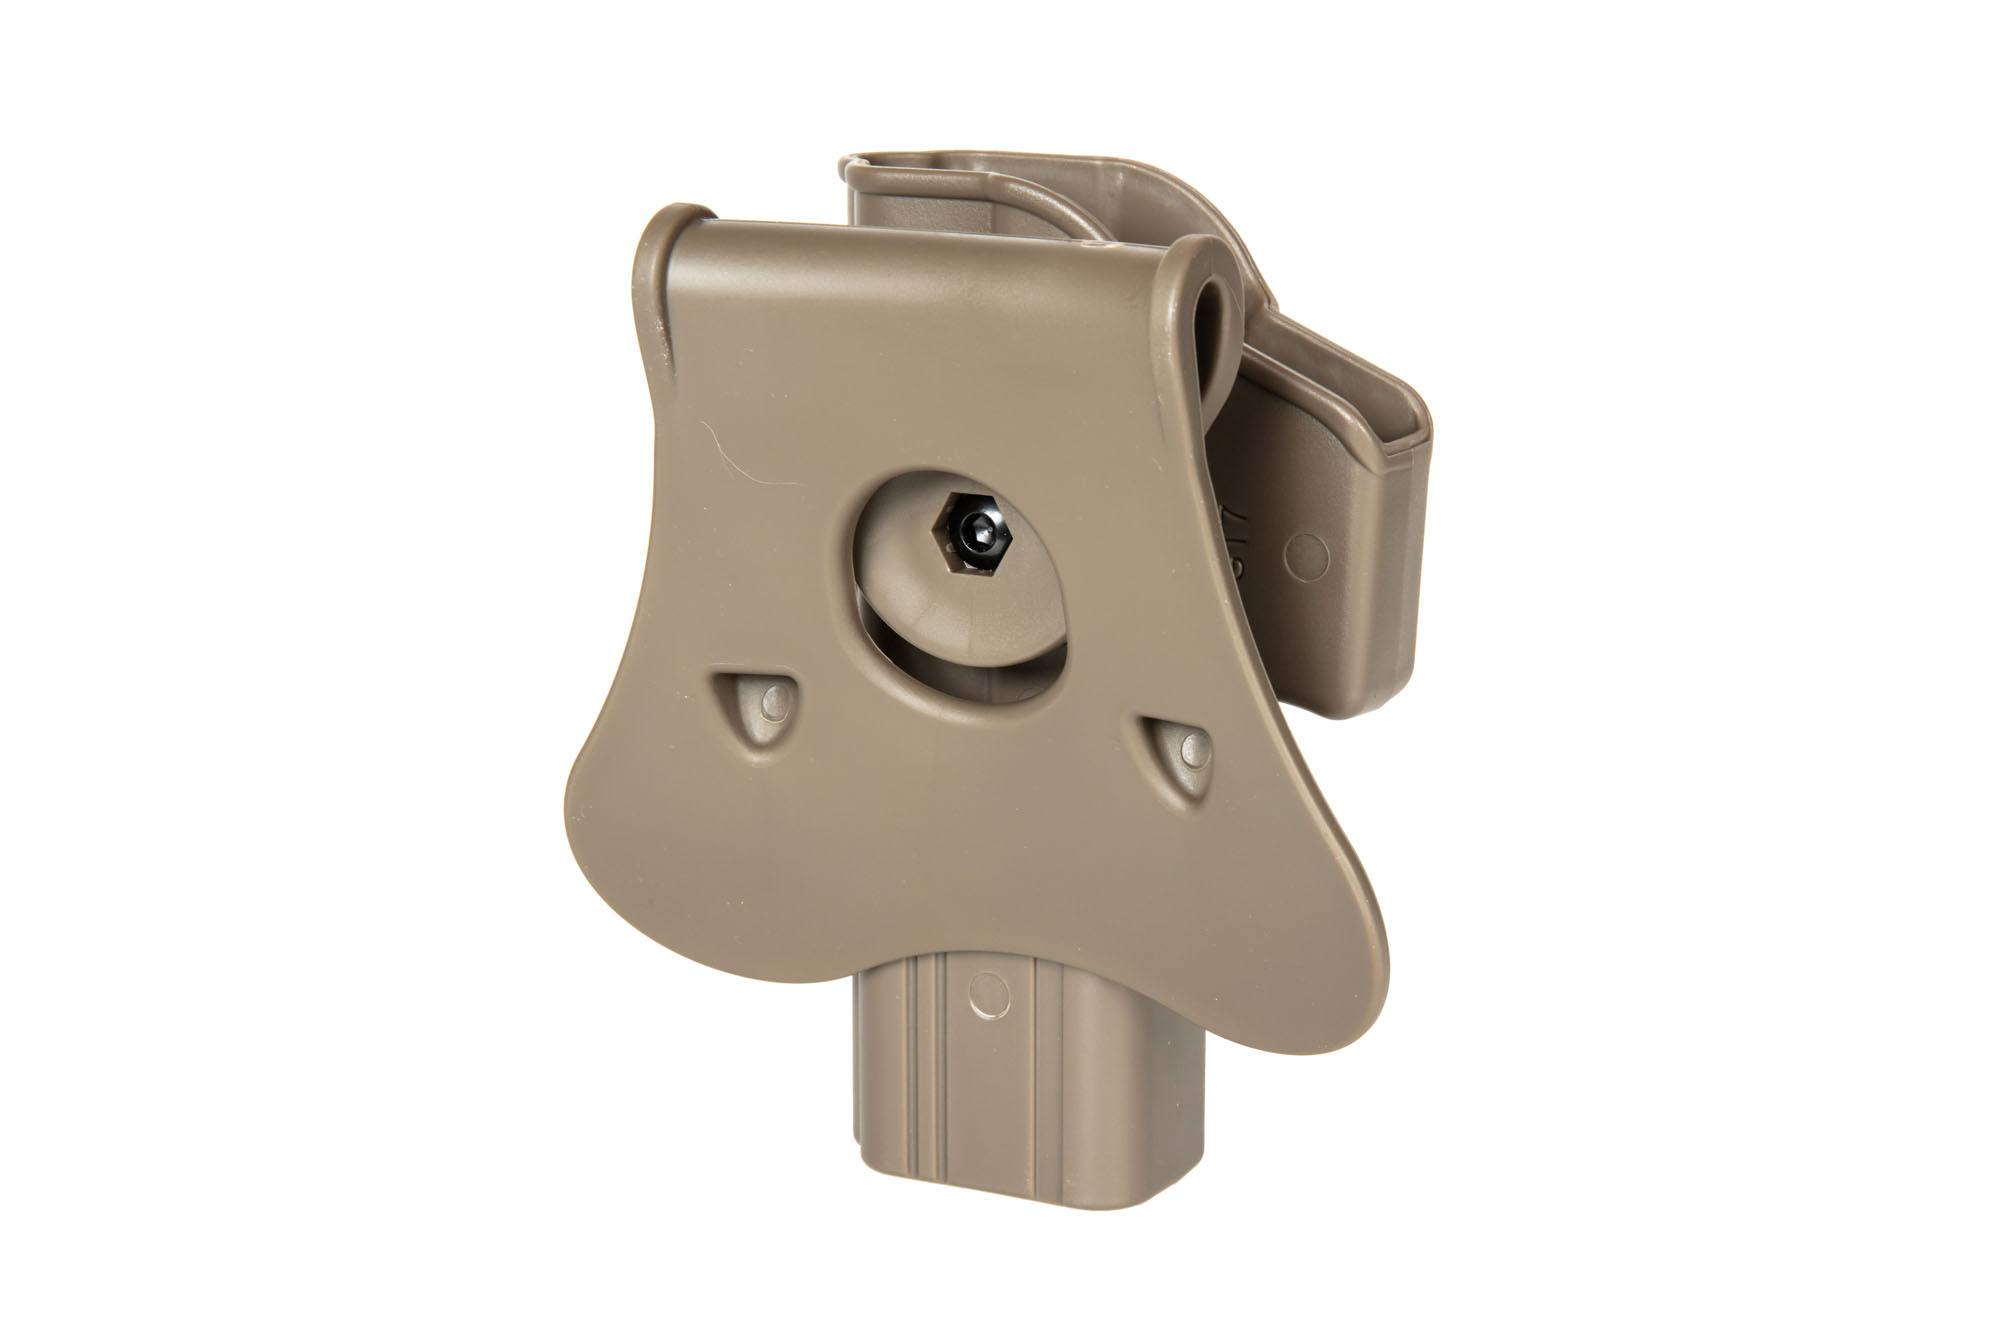 Per-Fit™ Holster for Glock 17/22/31 - FDE